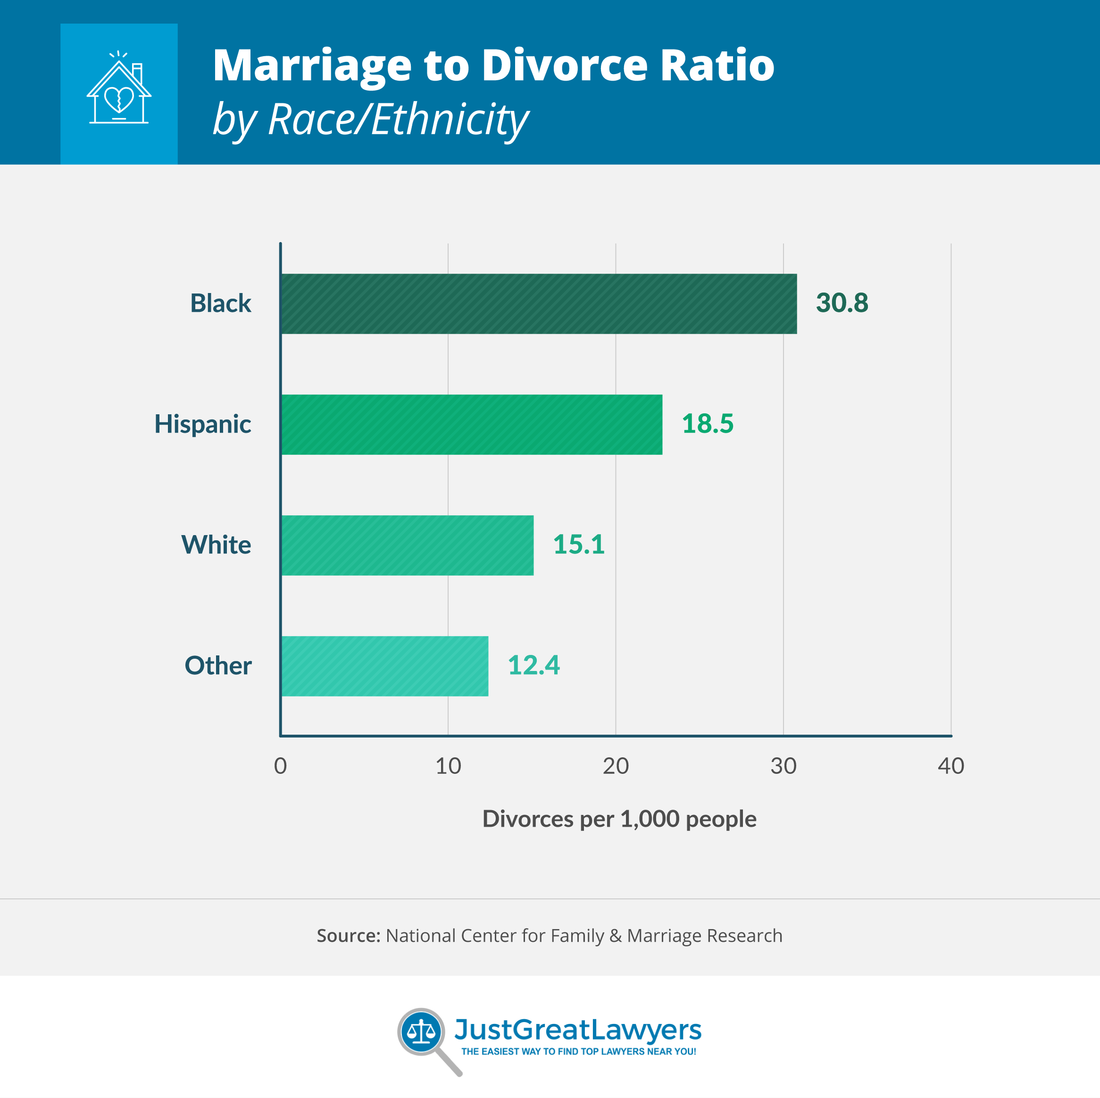 Marriage divorce ratio by race ethncity